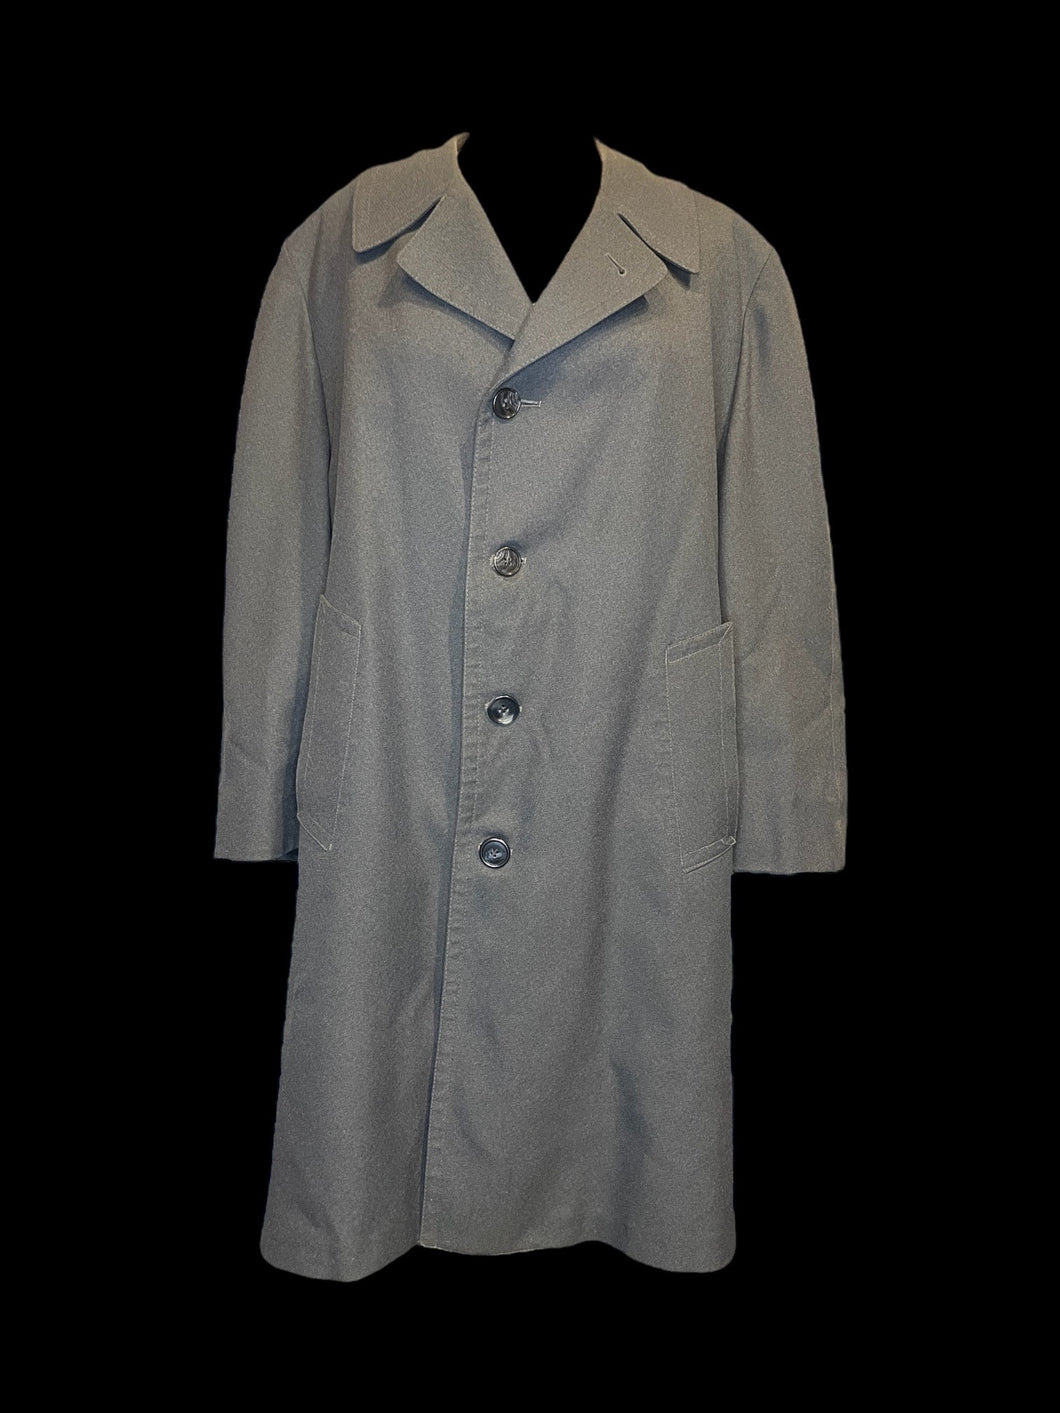 L Vintage 70s slate grey long sleeve button down coat w/removable warm lining, & pockets